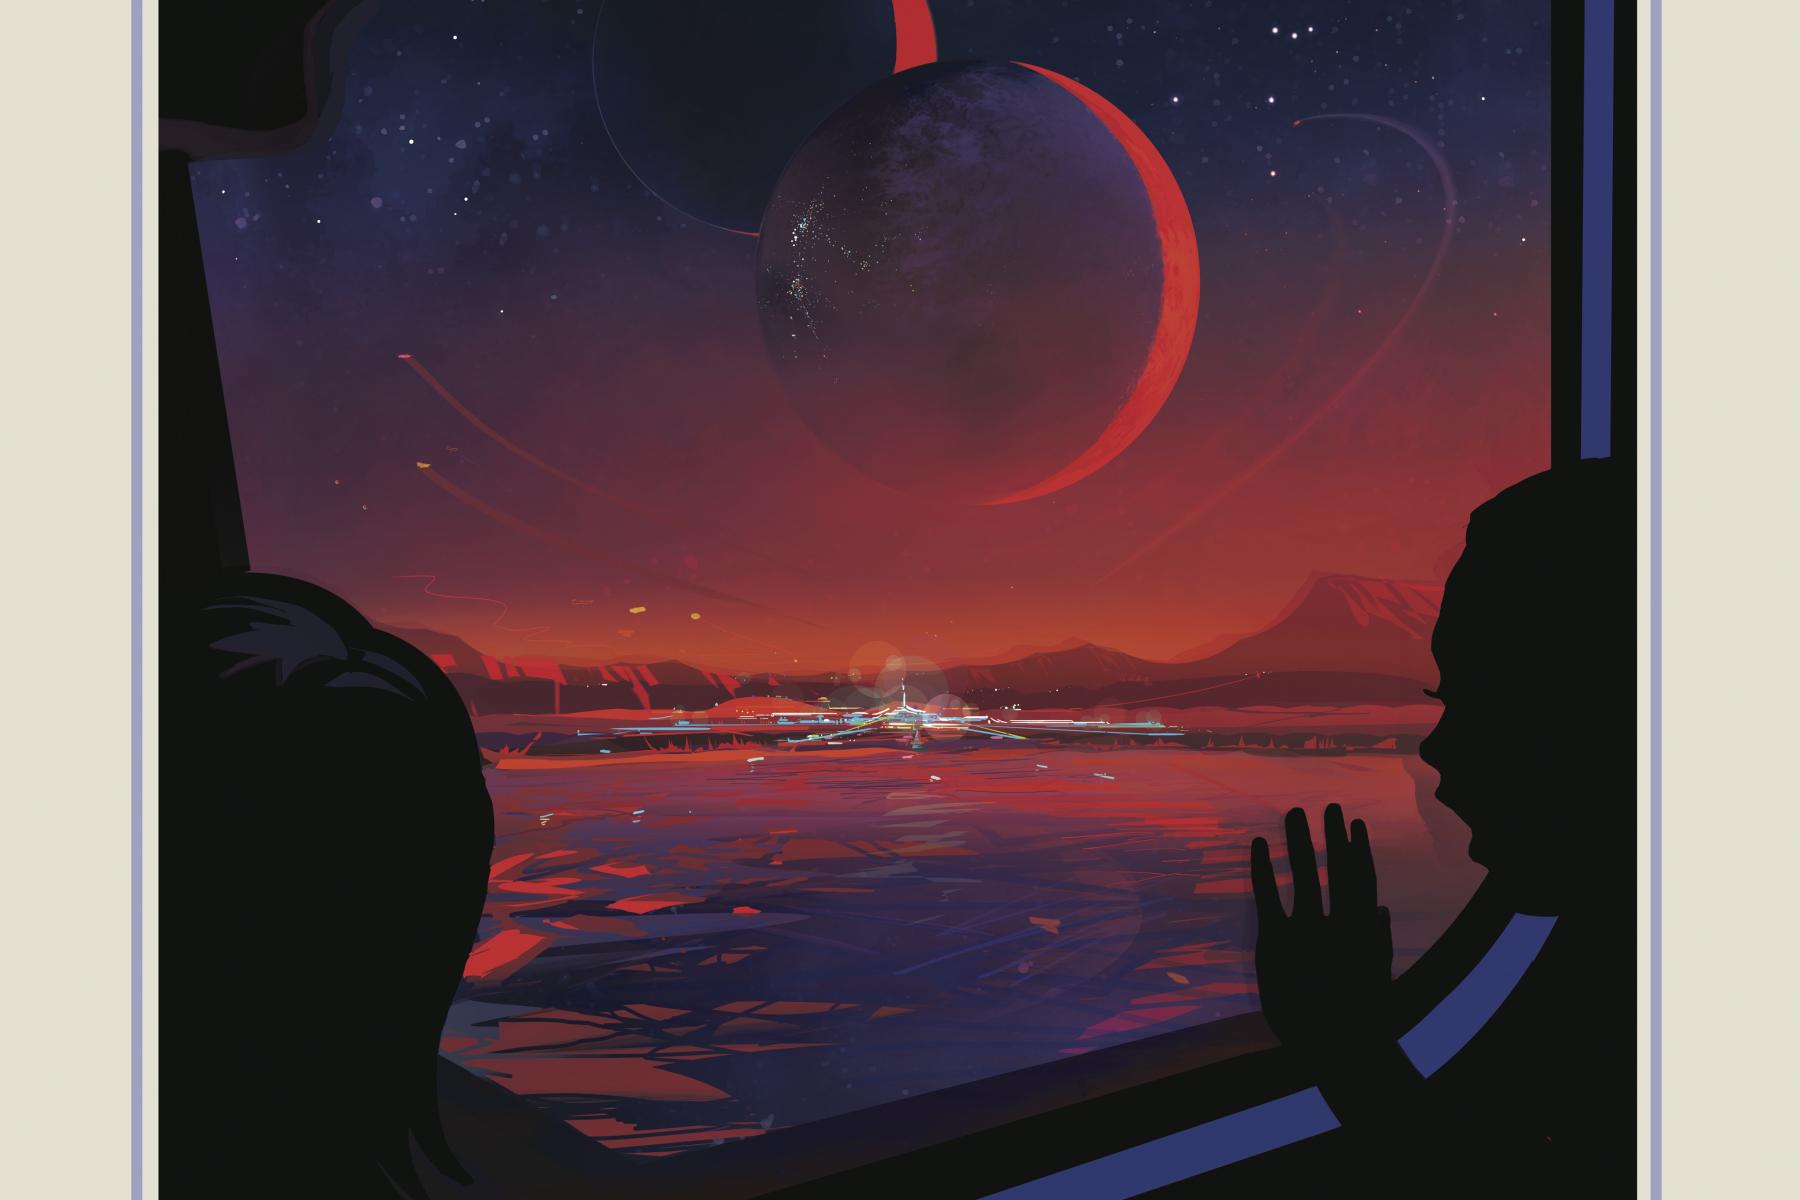 Illustration of a NASA travel poster depicting an alien world with five planets visible in the sky 